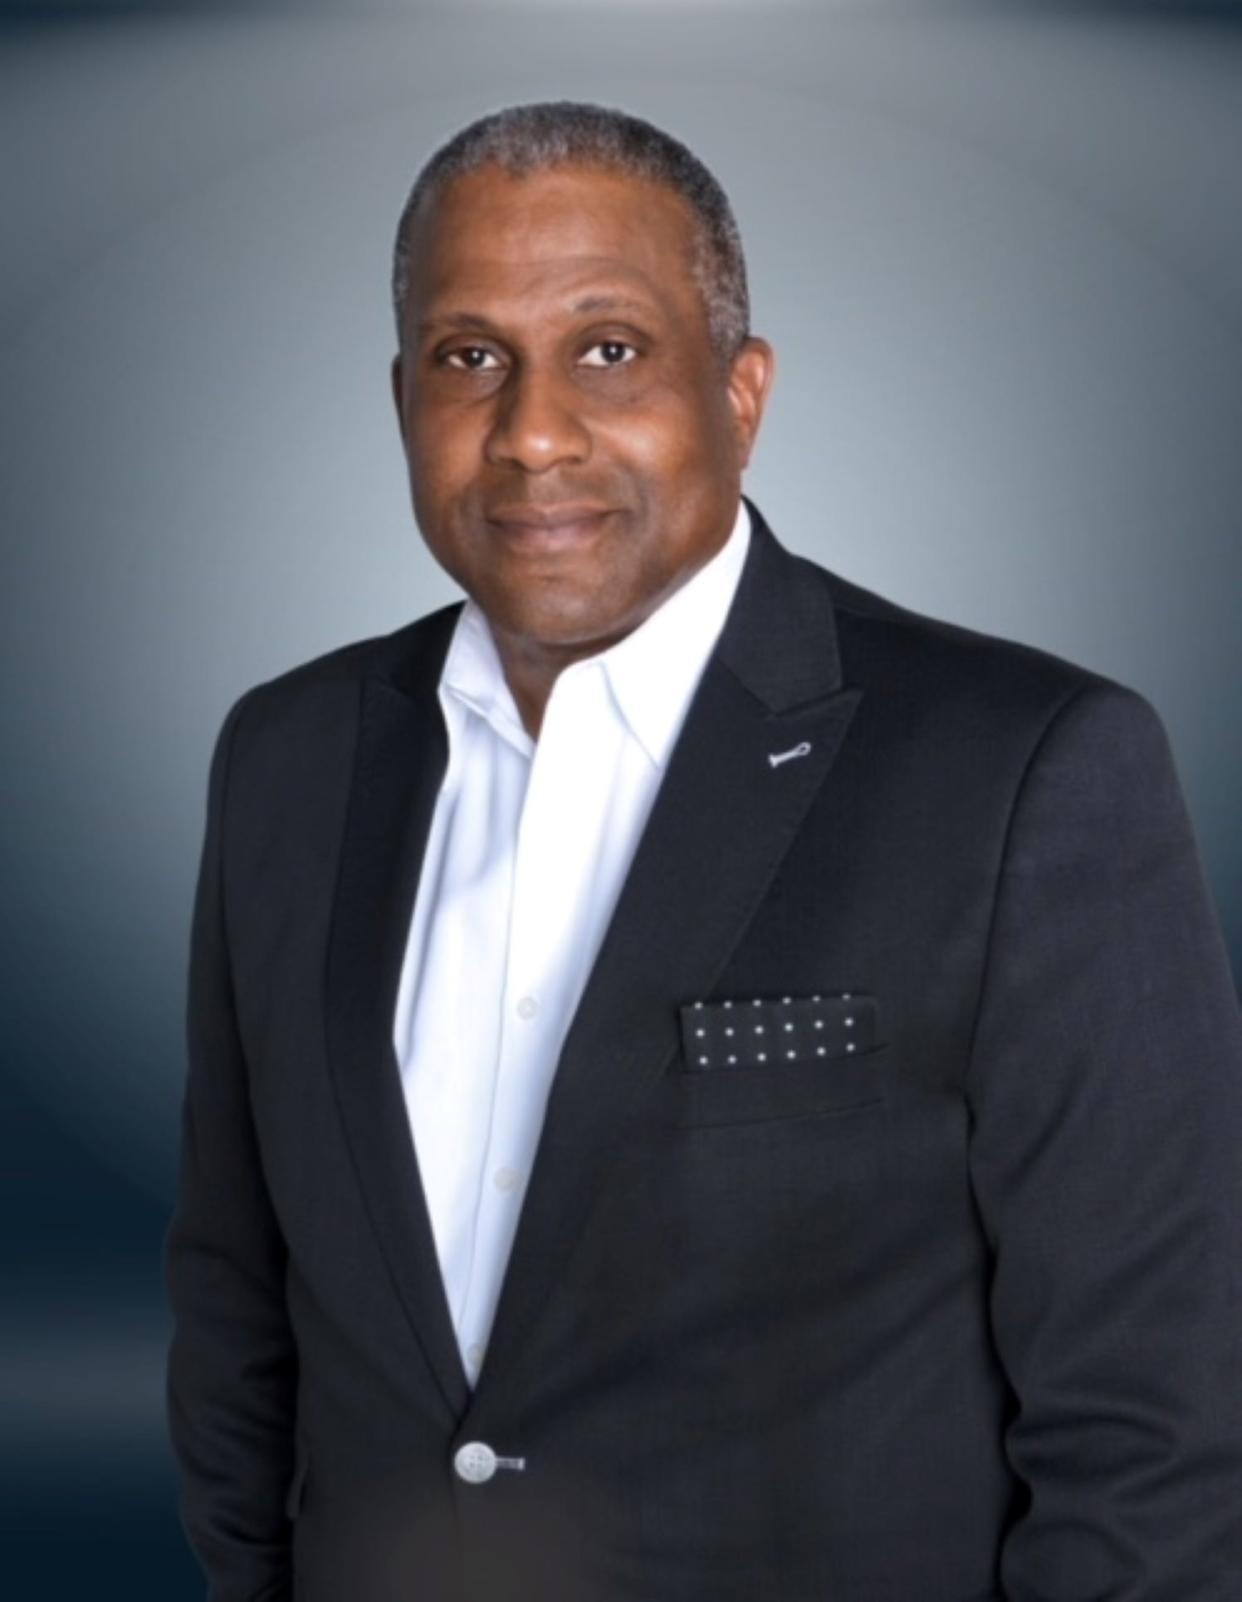 Author and talk show host Tavis Smiley is now broadcasting his syndicated show on WNOV.